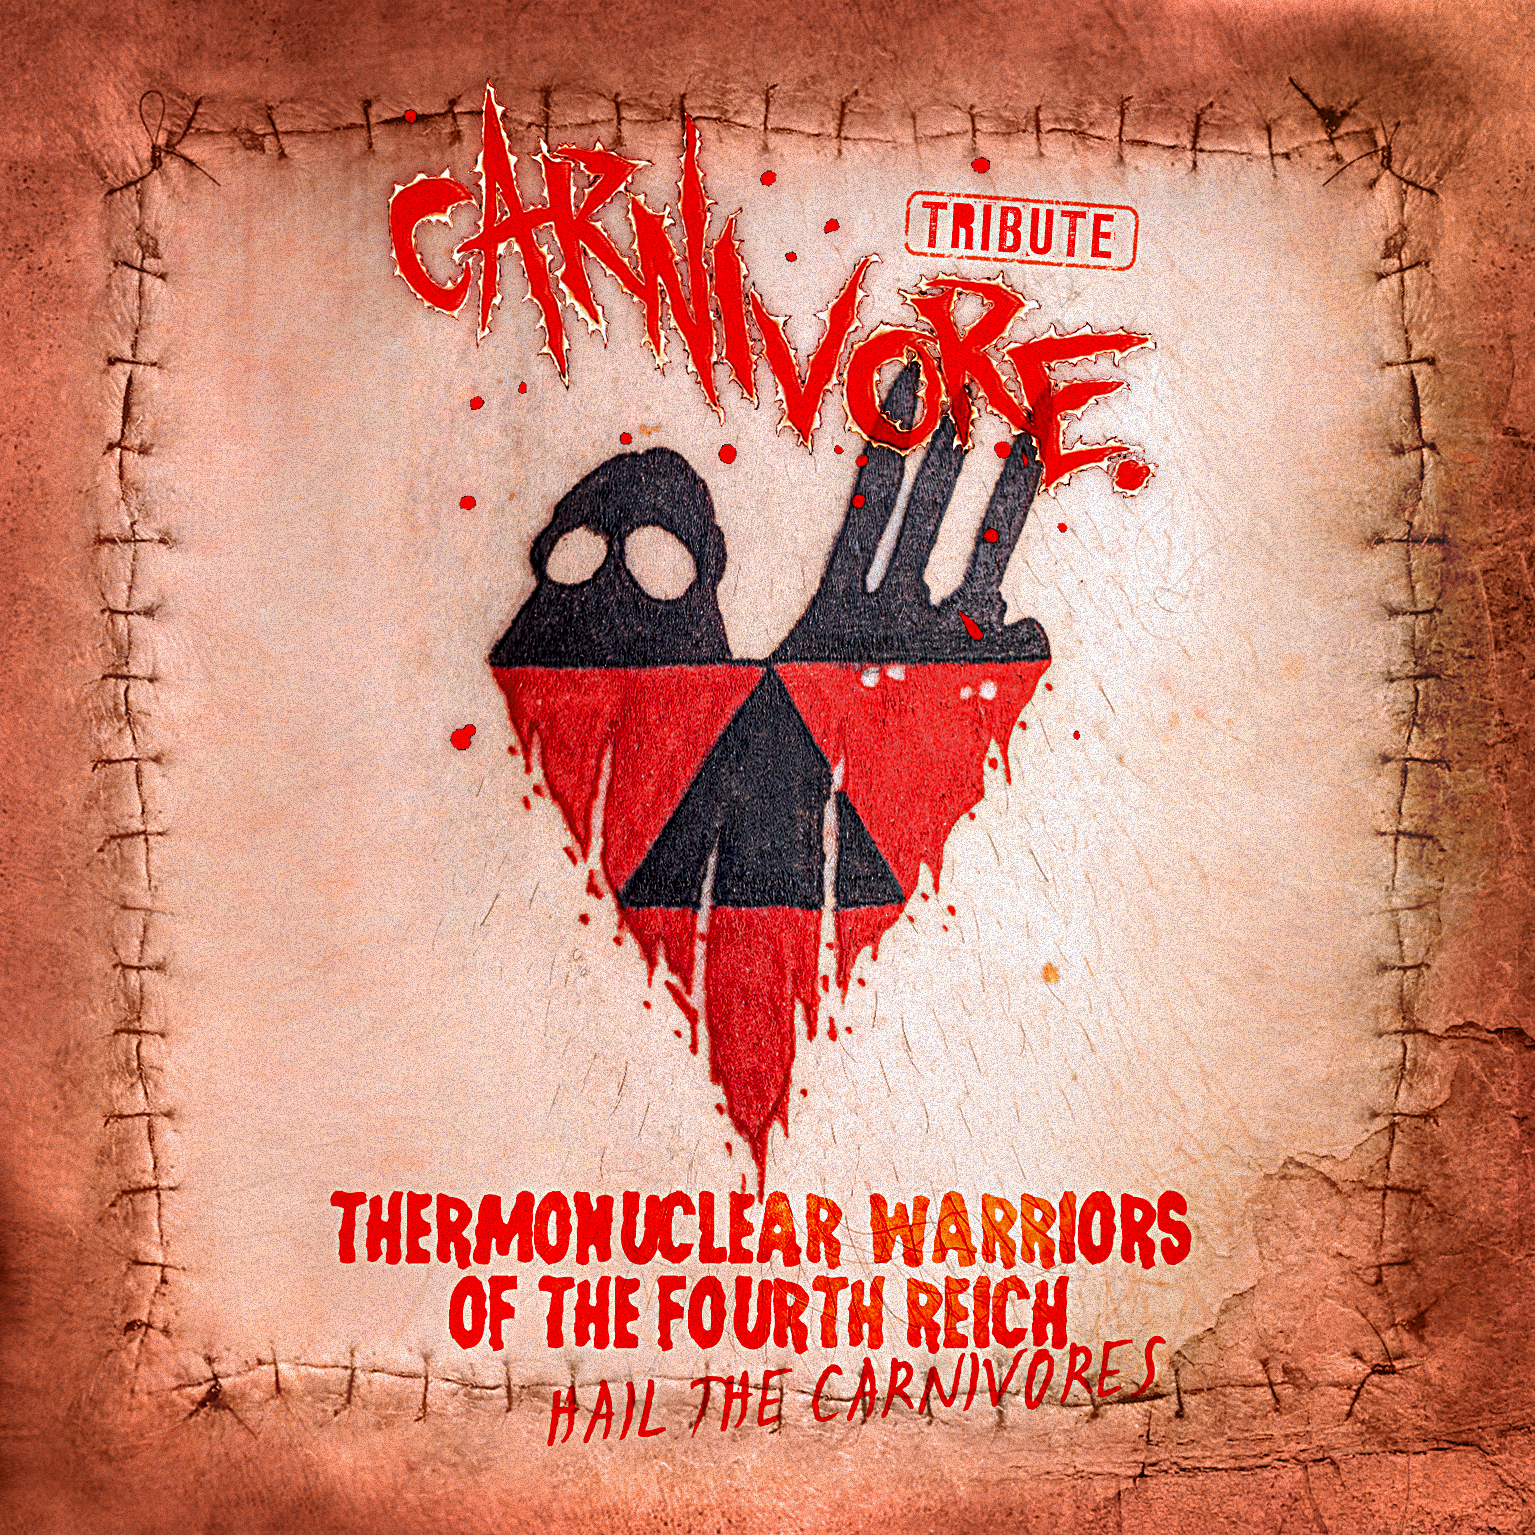 V/A „Tribute to Carnivore – Thermonuclear Warriors of The fourth Reich”